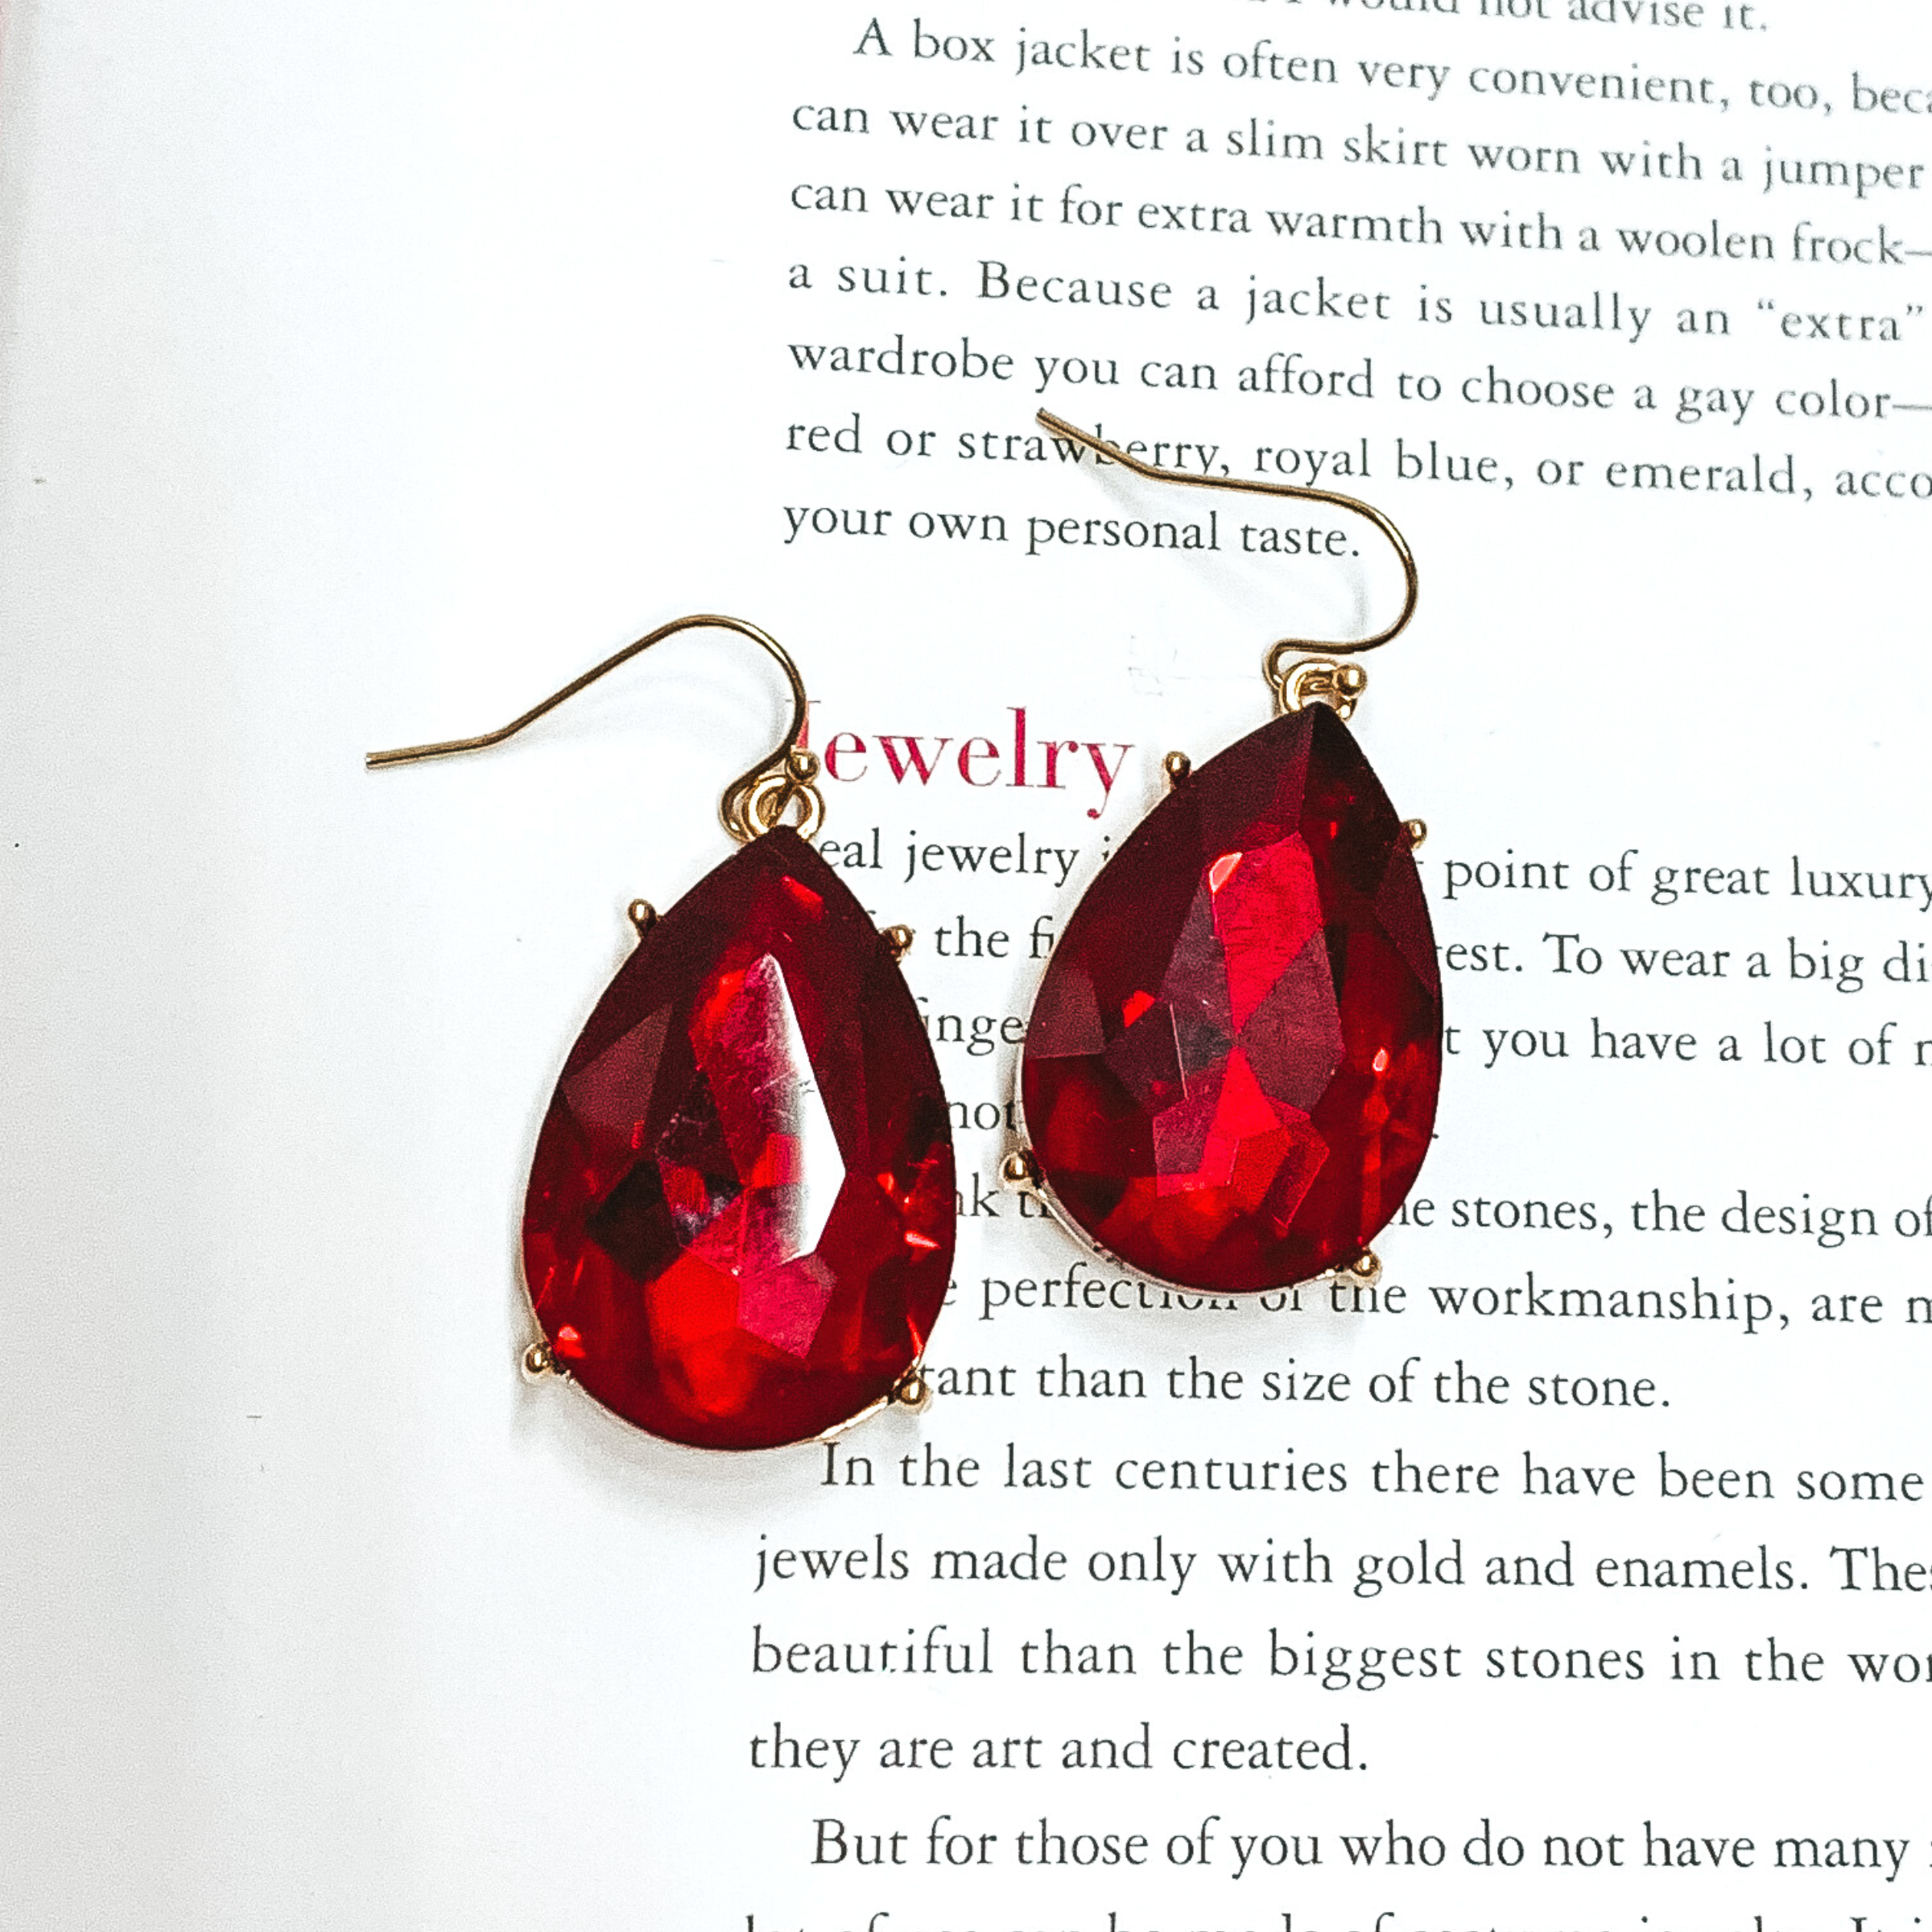 Gold fish hook earrings with a hanging red teardrop crystal. These earrings are pictured on an open book.